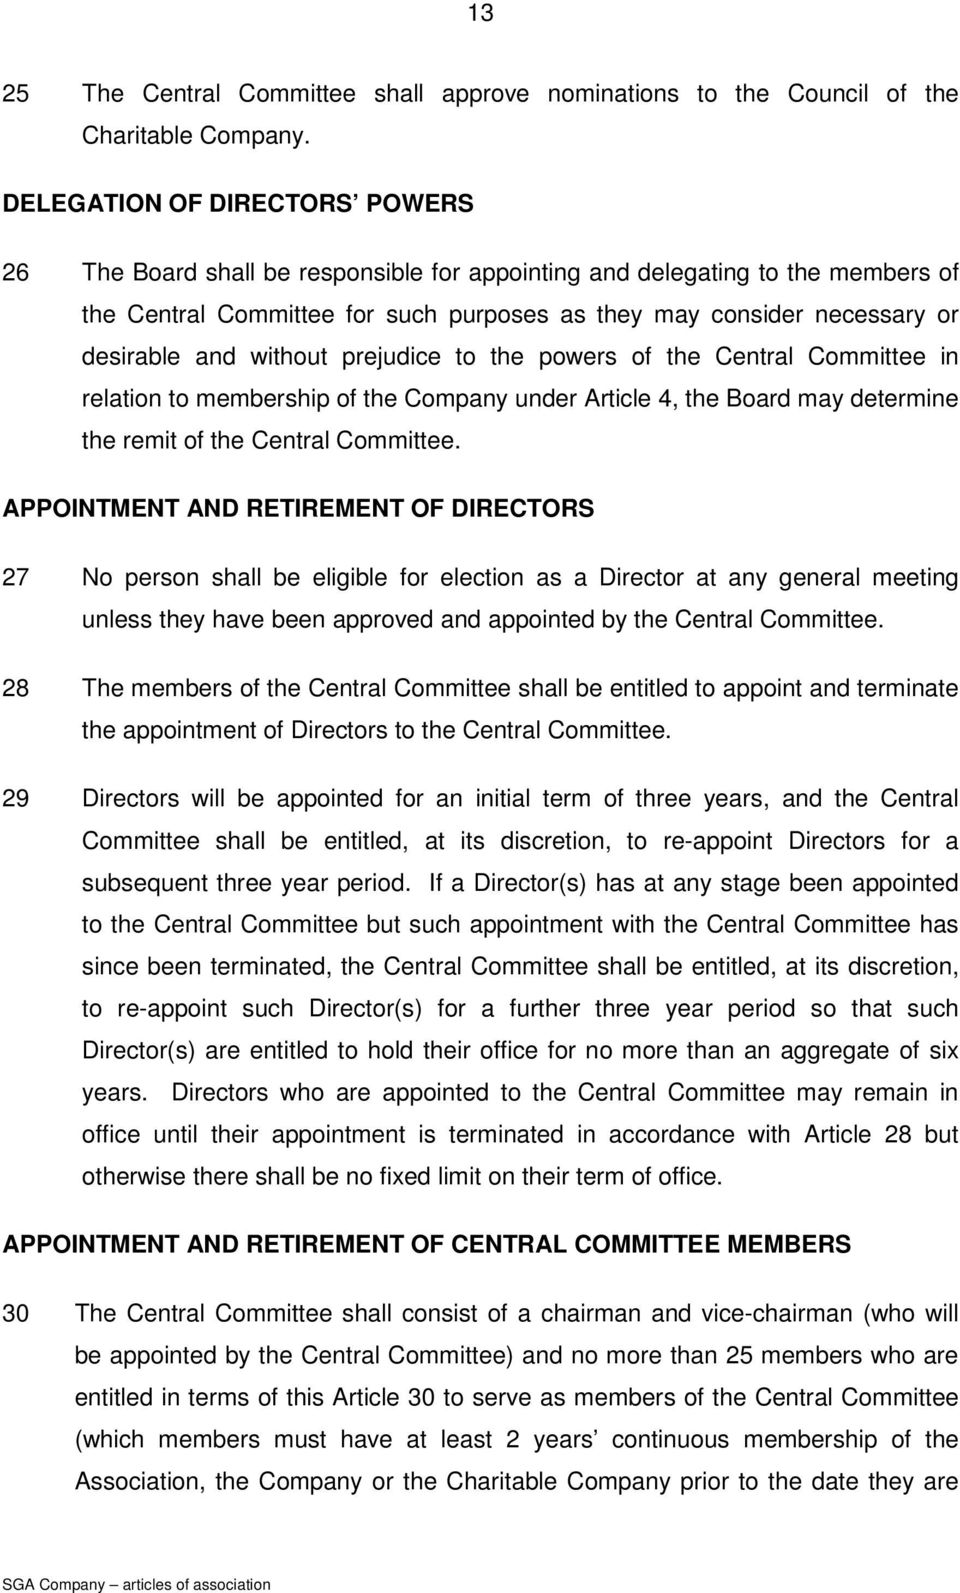 and without prejudice to the powers of the Central Committee in relation to membership of the Company under Article 4, the Board may determine the remit of the Central Committee.